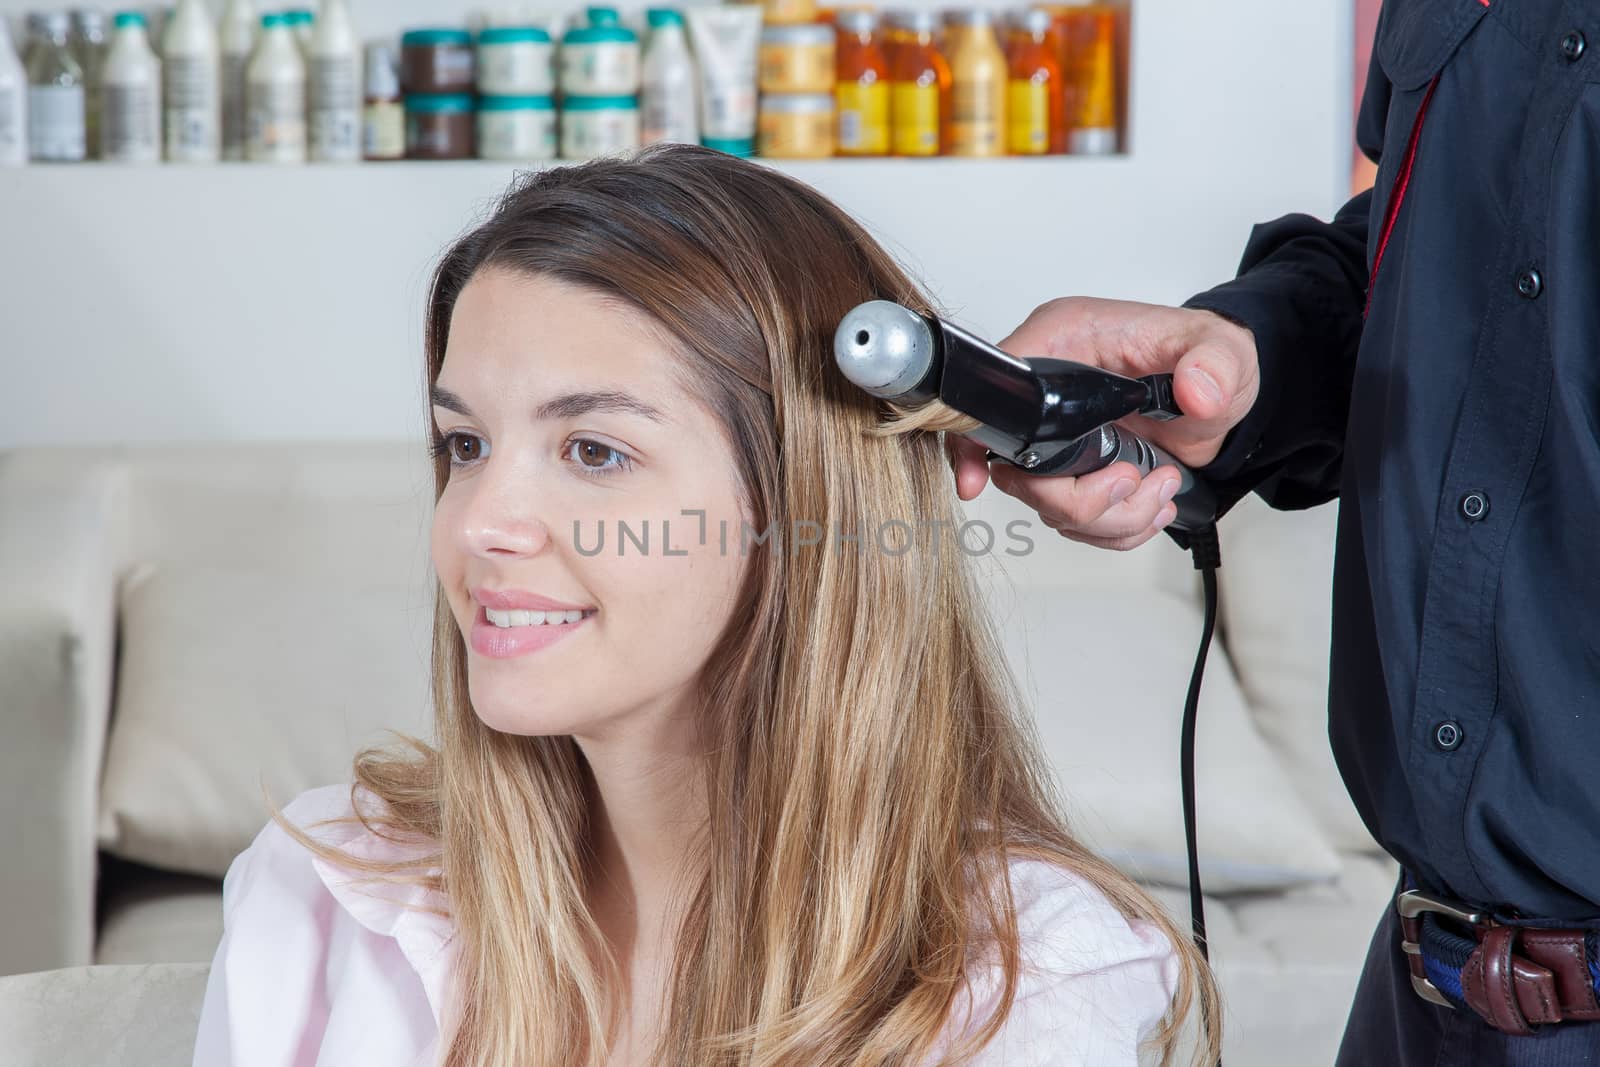 The coiffeur use a curling iron